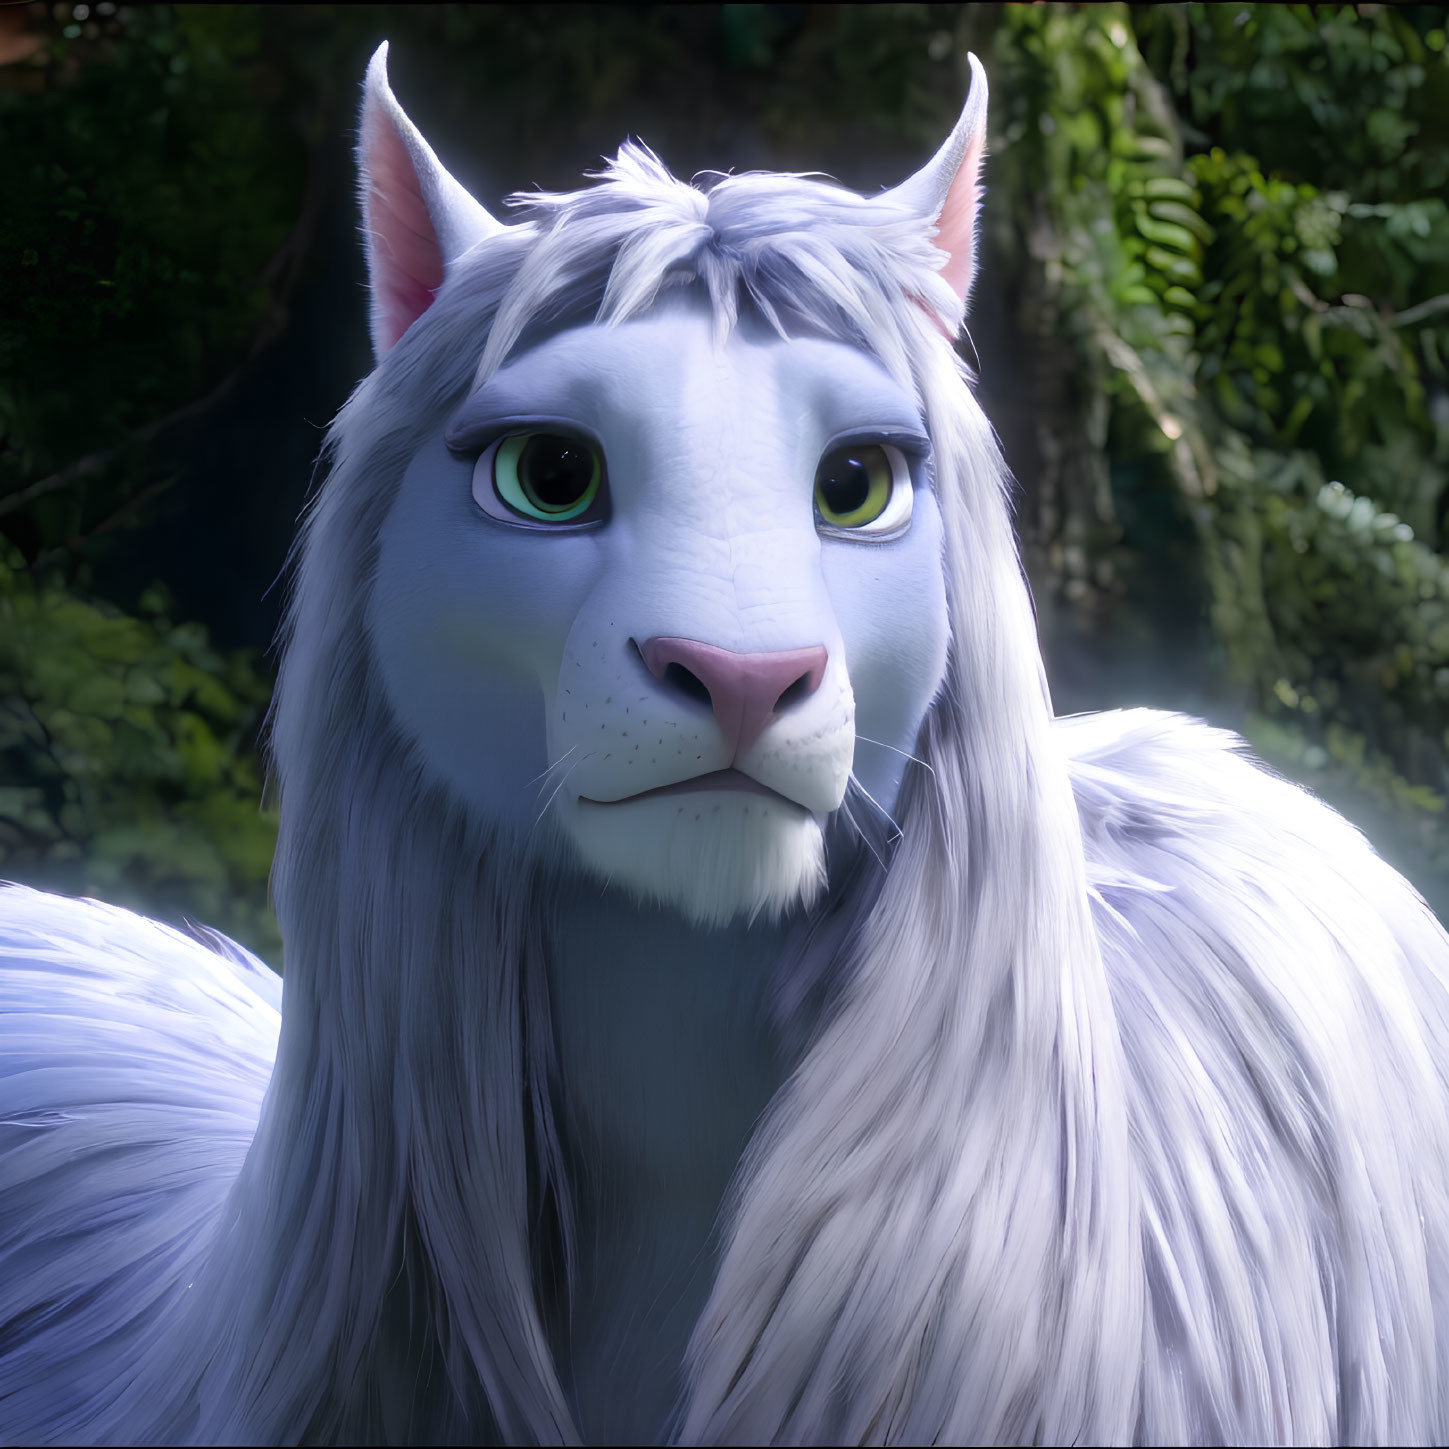 Mythical white creature with blue eyes in dark forest